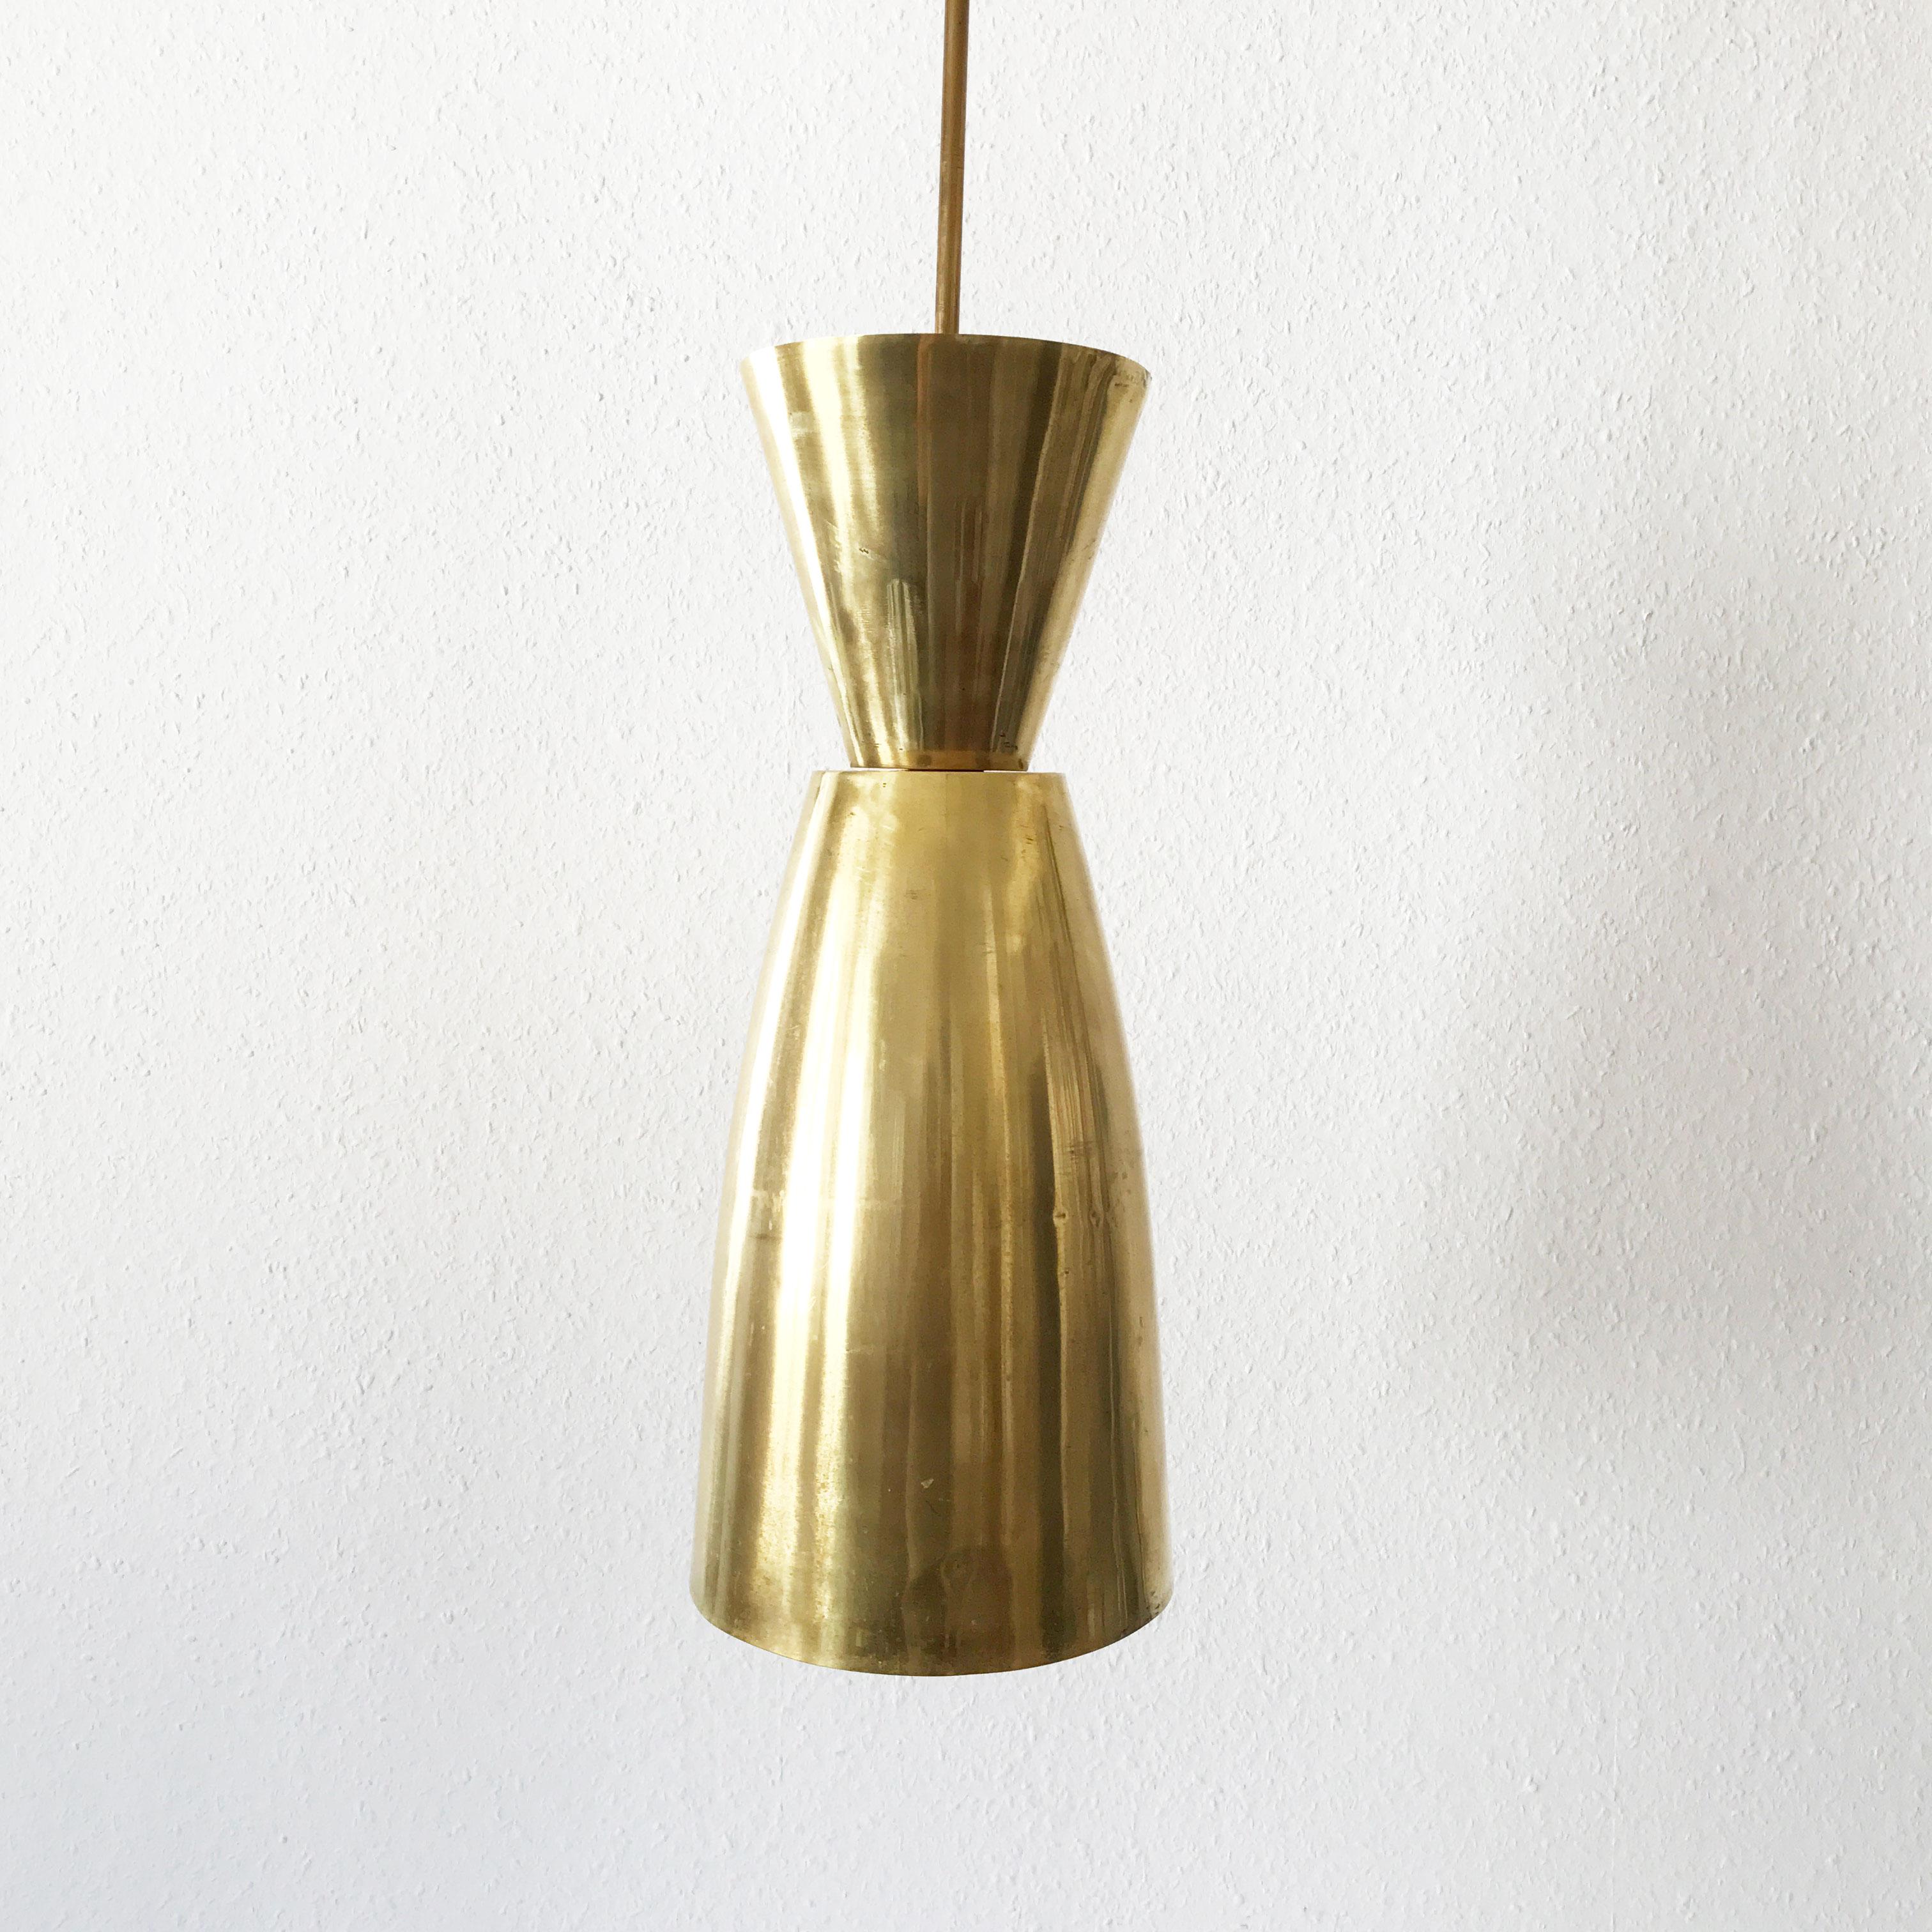 Large Mid-Century Modern Diabolo Brass Pendant Lamp, 1950s, Germany For Sale 2